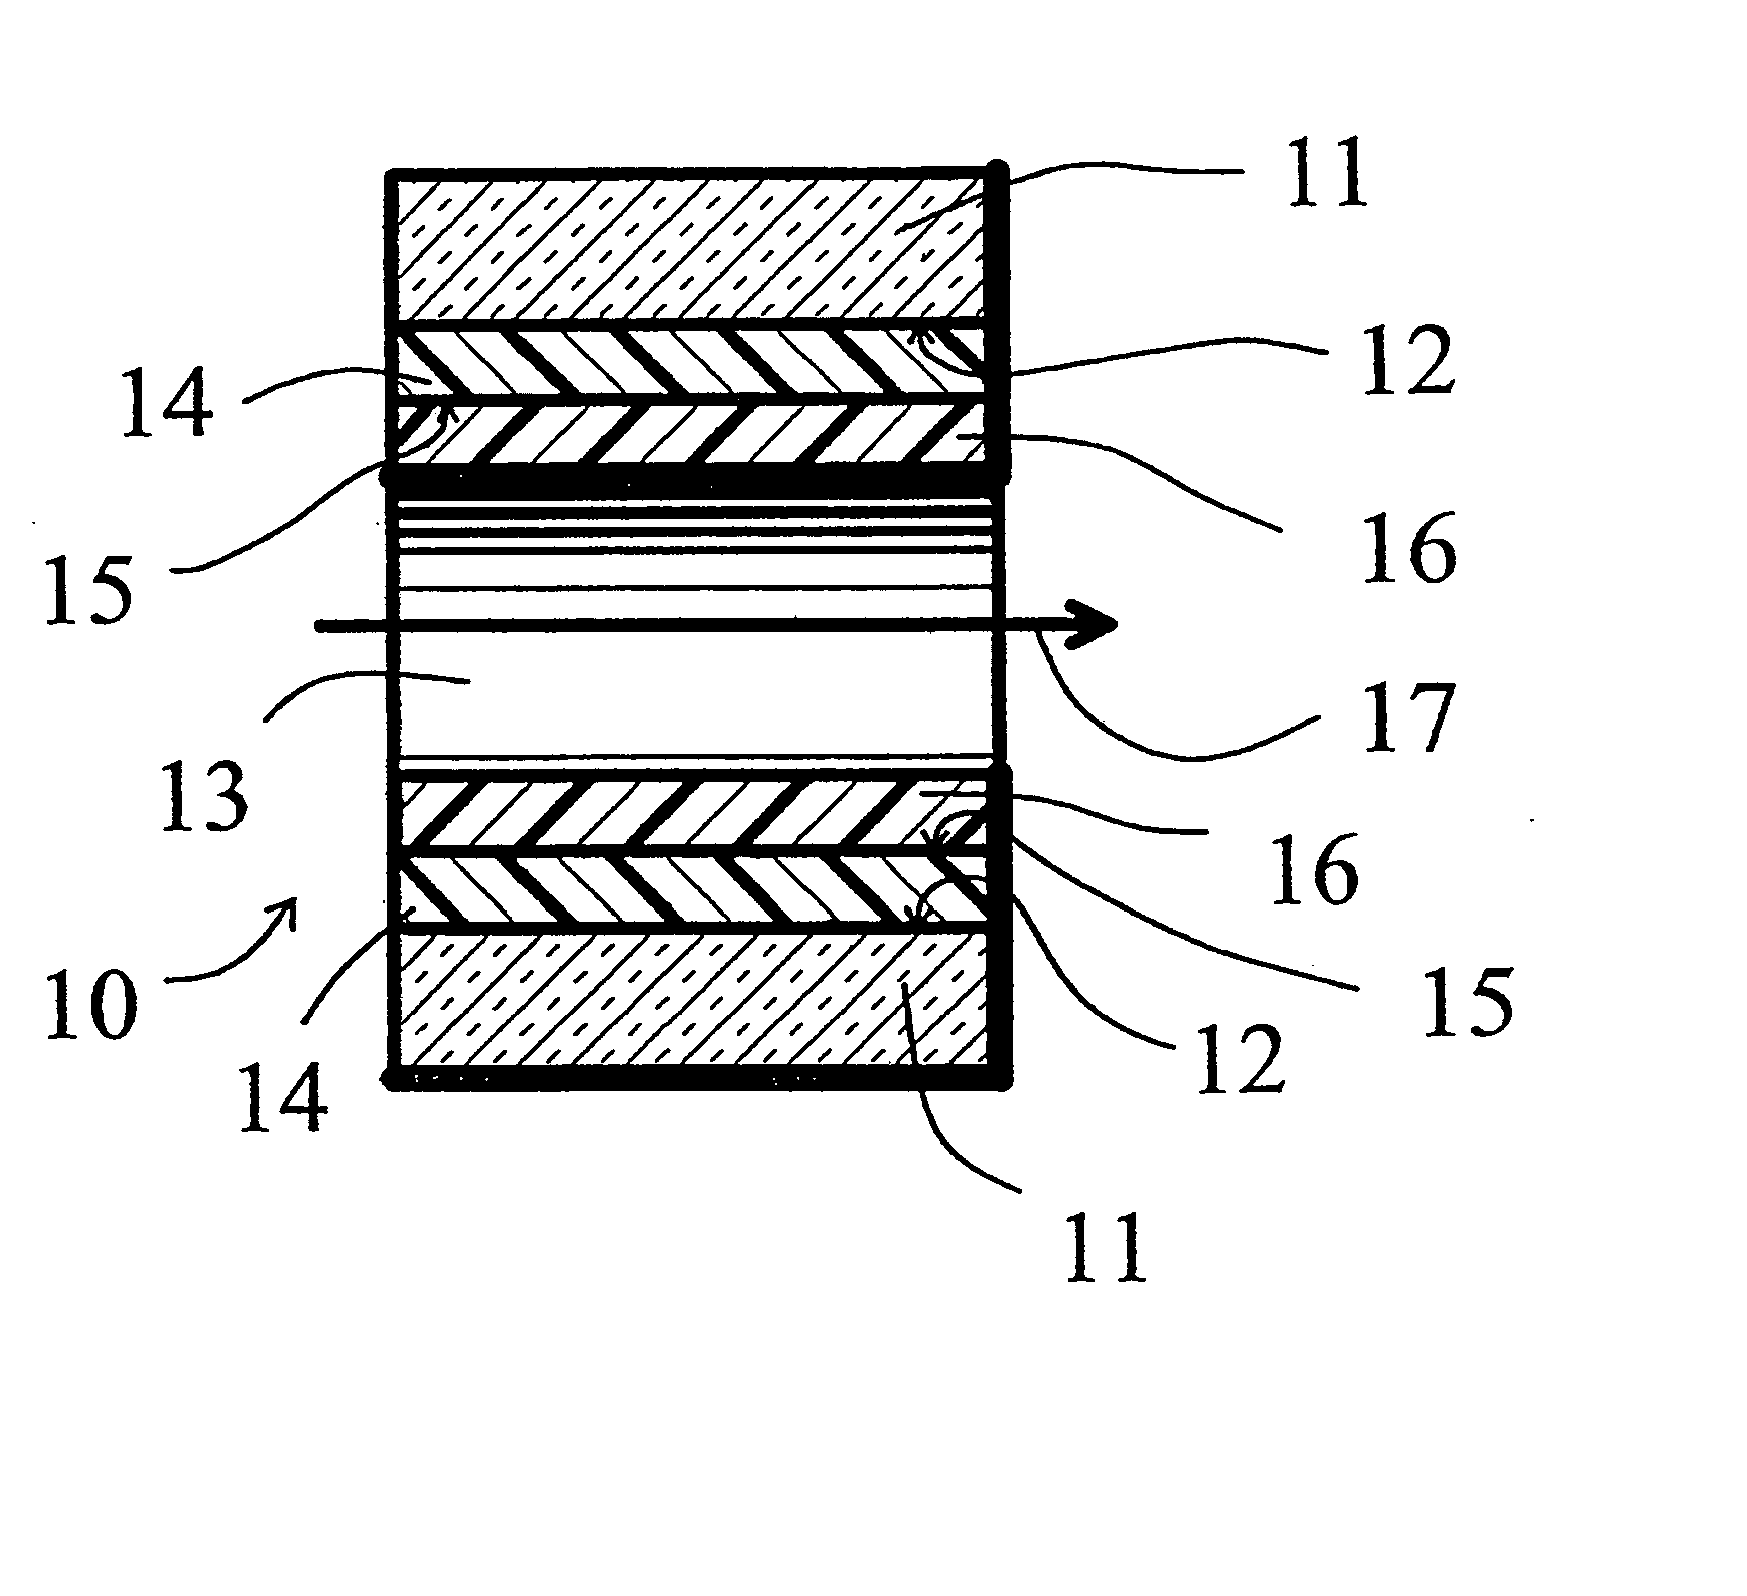 Deactivated surfaces for chromatographic separations and methods of making and using the same